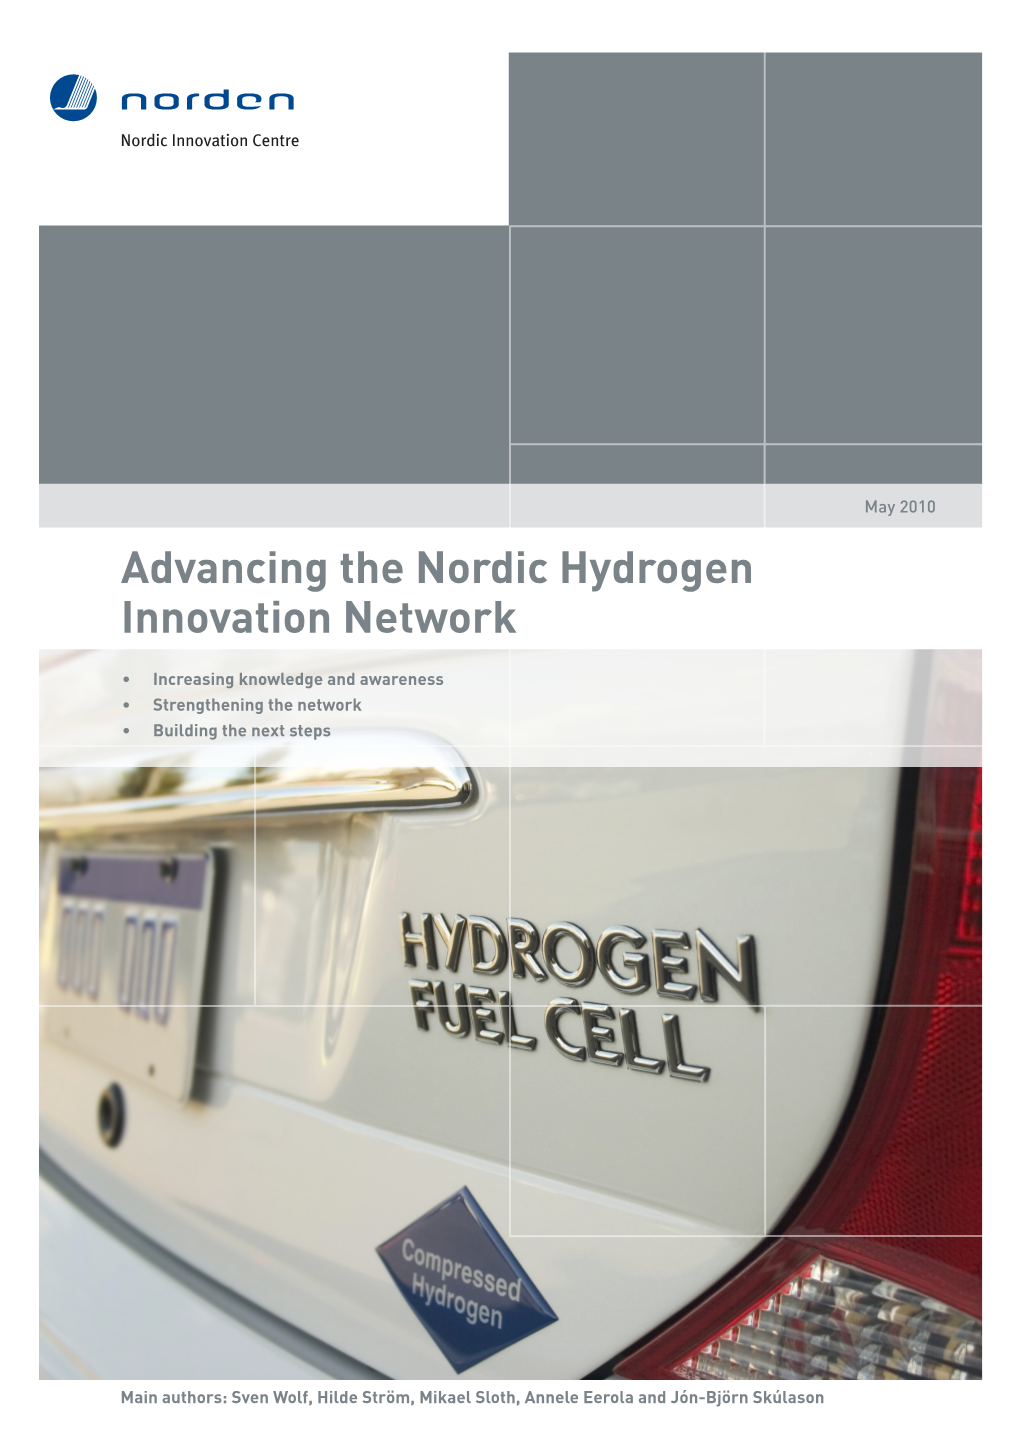 Advancing the Nordic Hydrogen Innovation Network